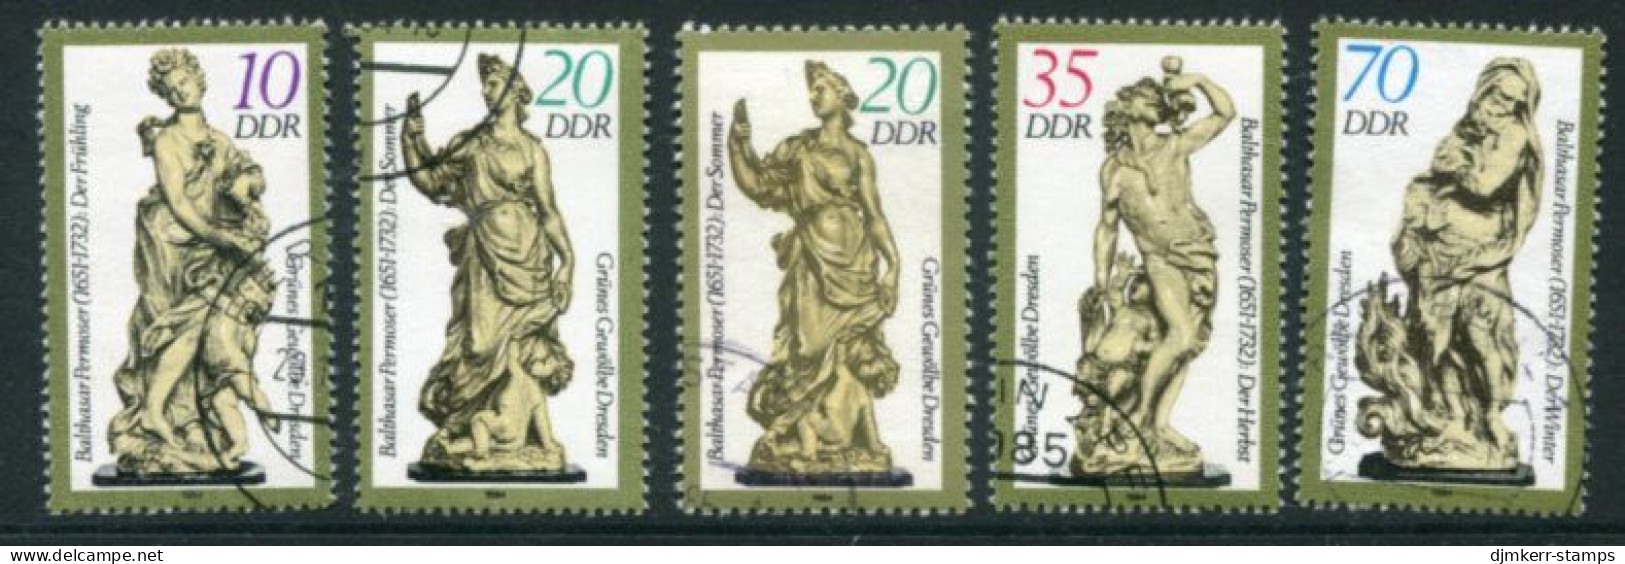 DDR 1984 Statues From The Green Vault With Both 20 Pf. Used.  Michel 2905-08 - Oblitérés